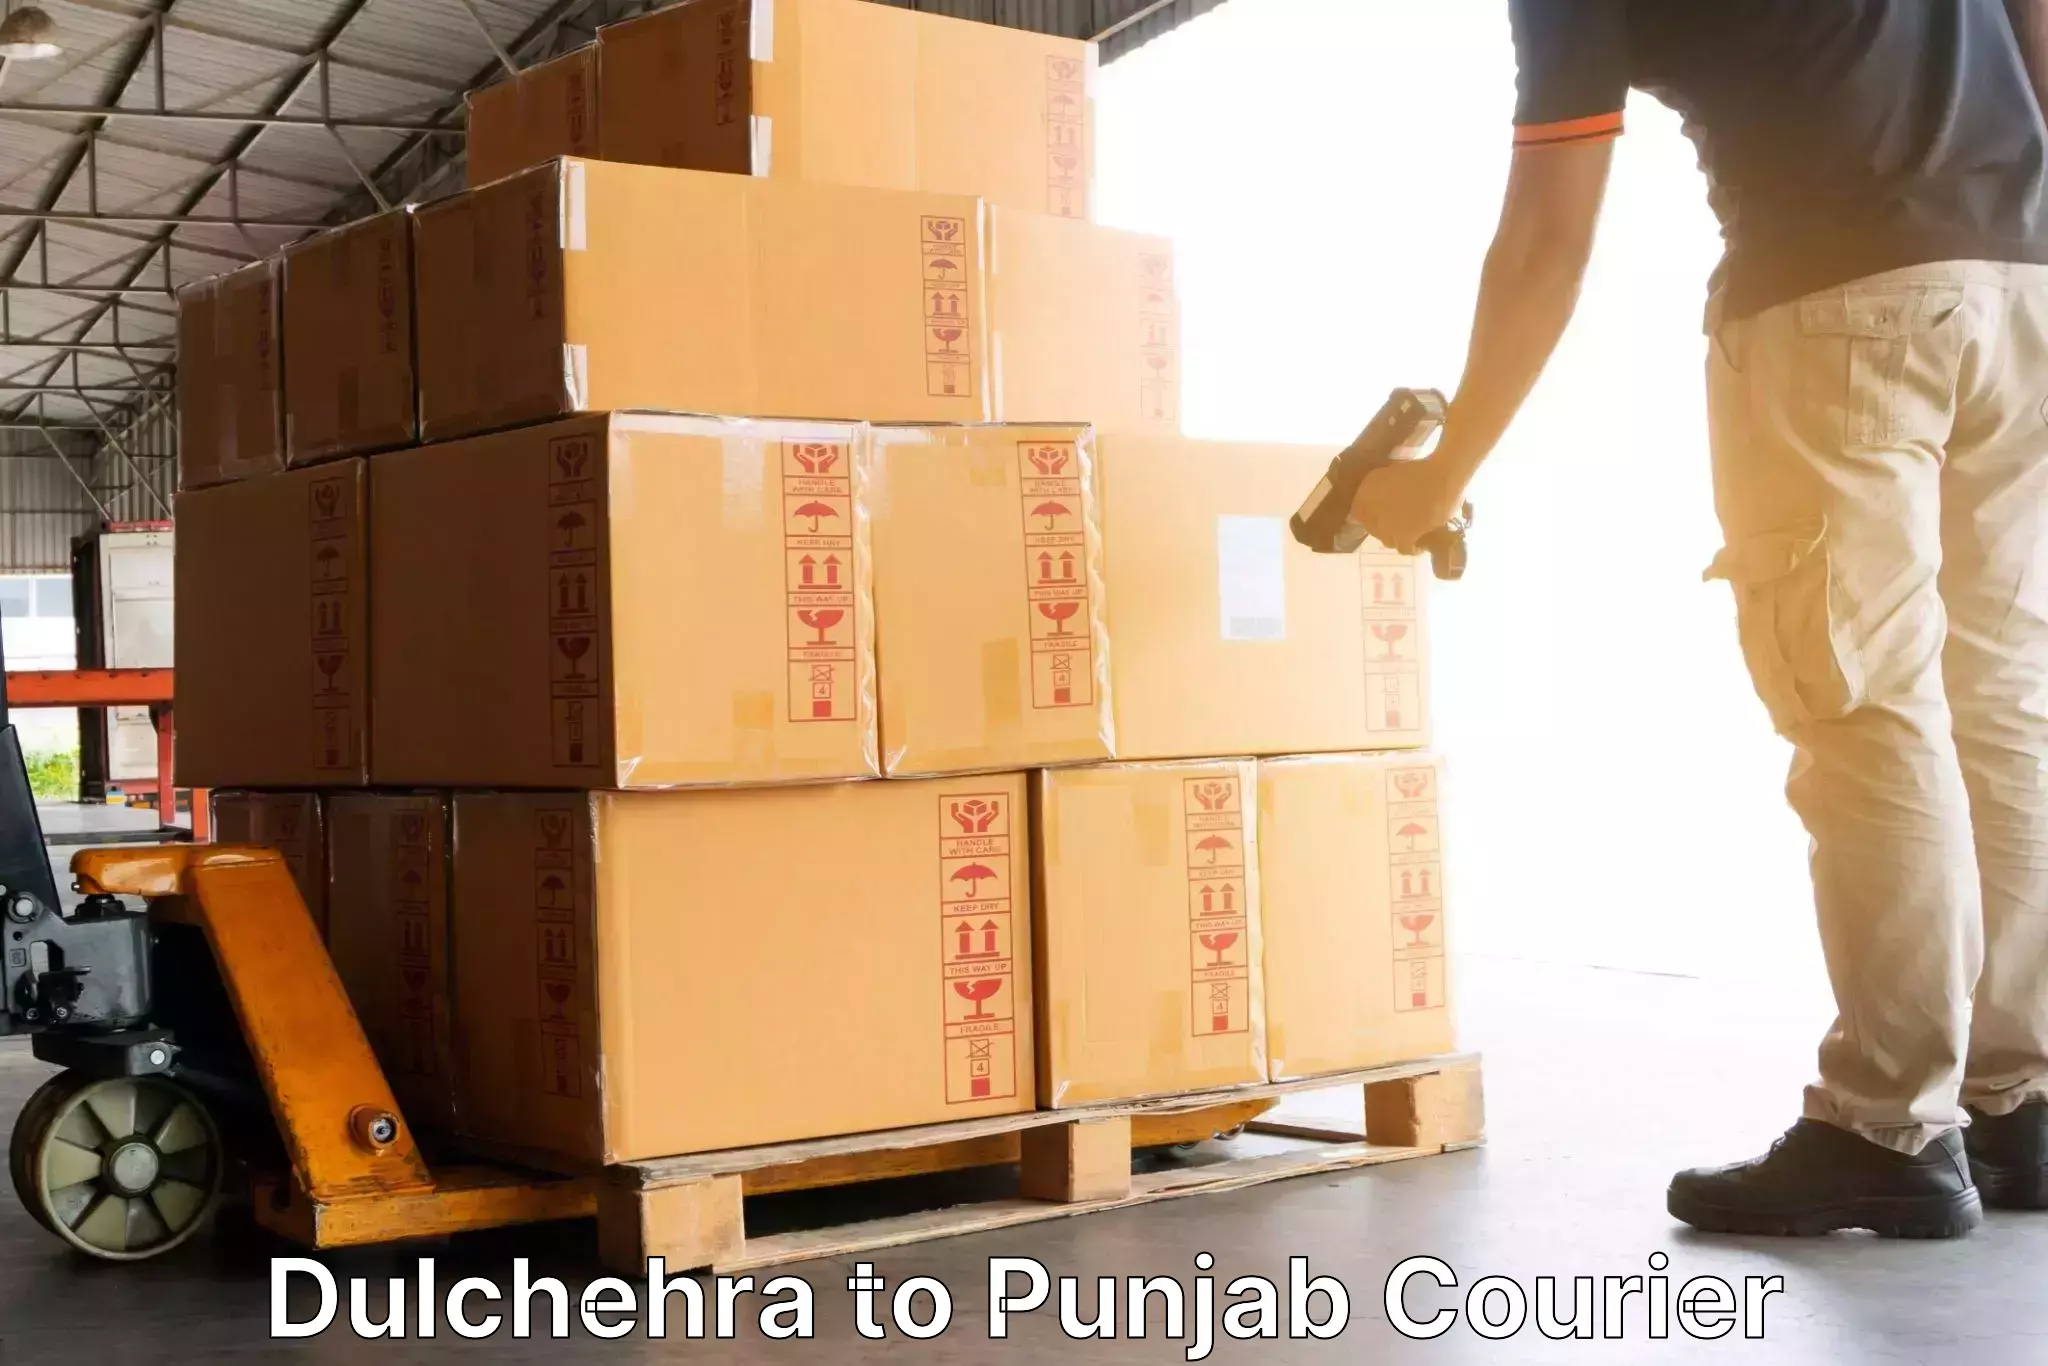 Express mail solutions Dulchehra to Beas